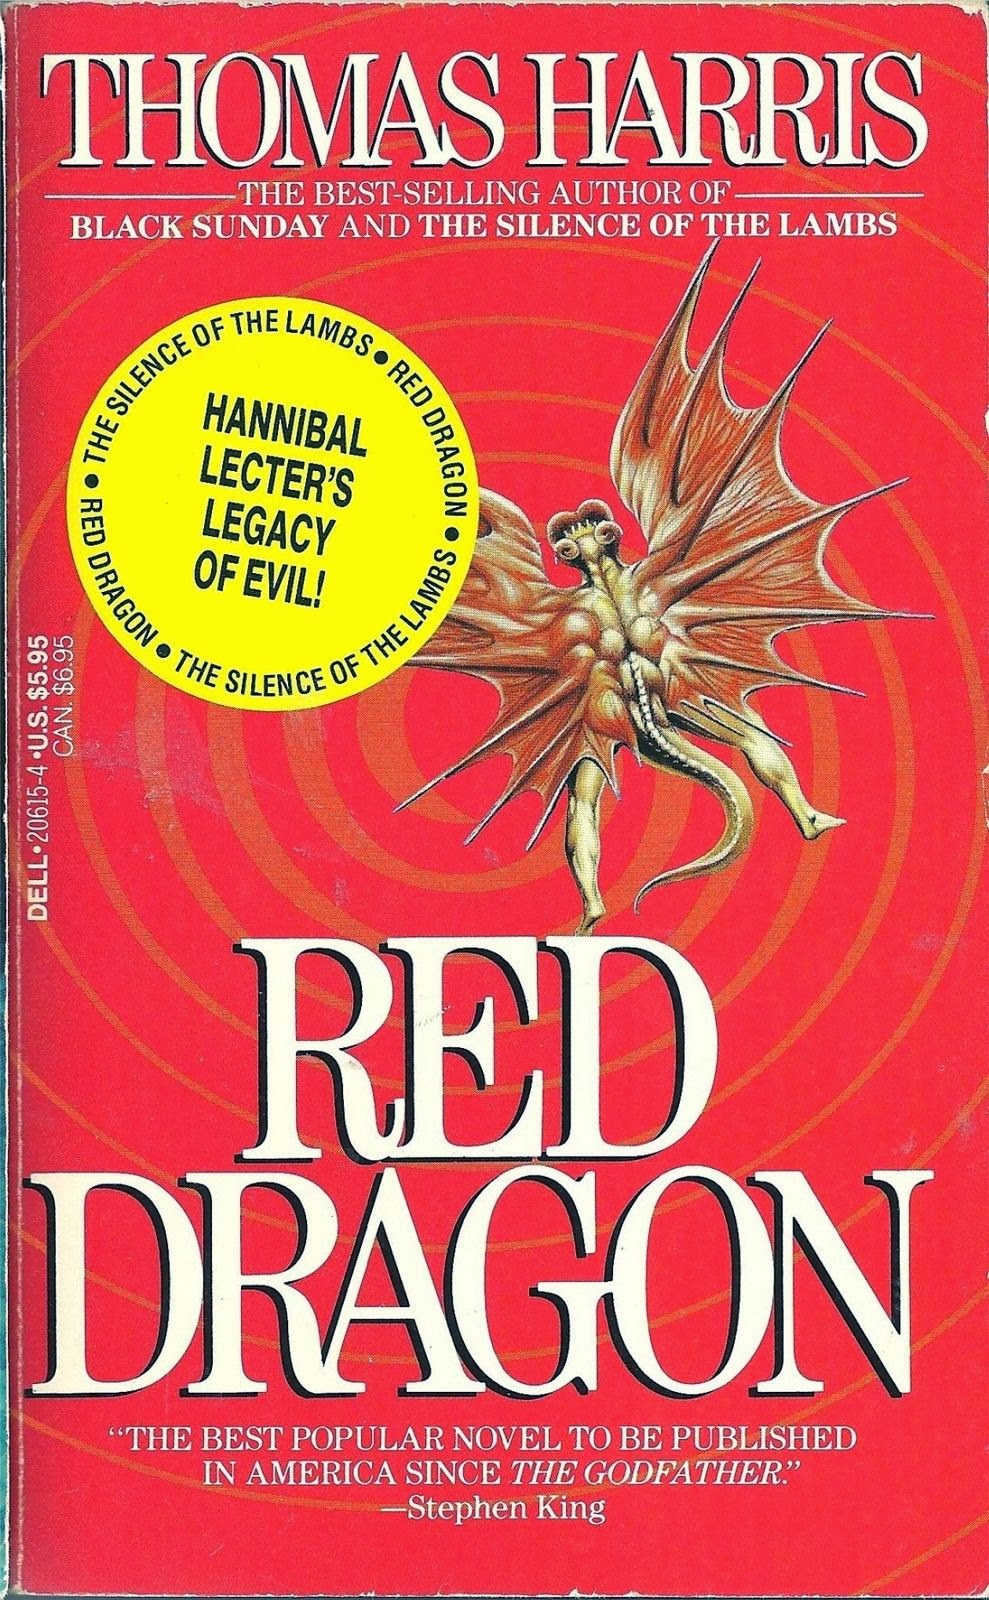 Much Horror Fiction: Red Dragon by Thomas Harris (1981): Terror the Human Form